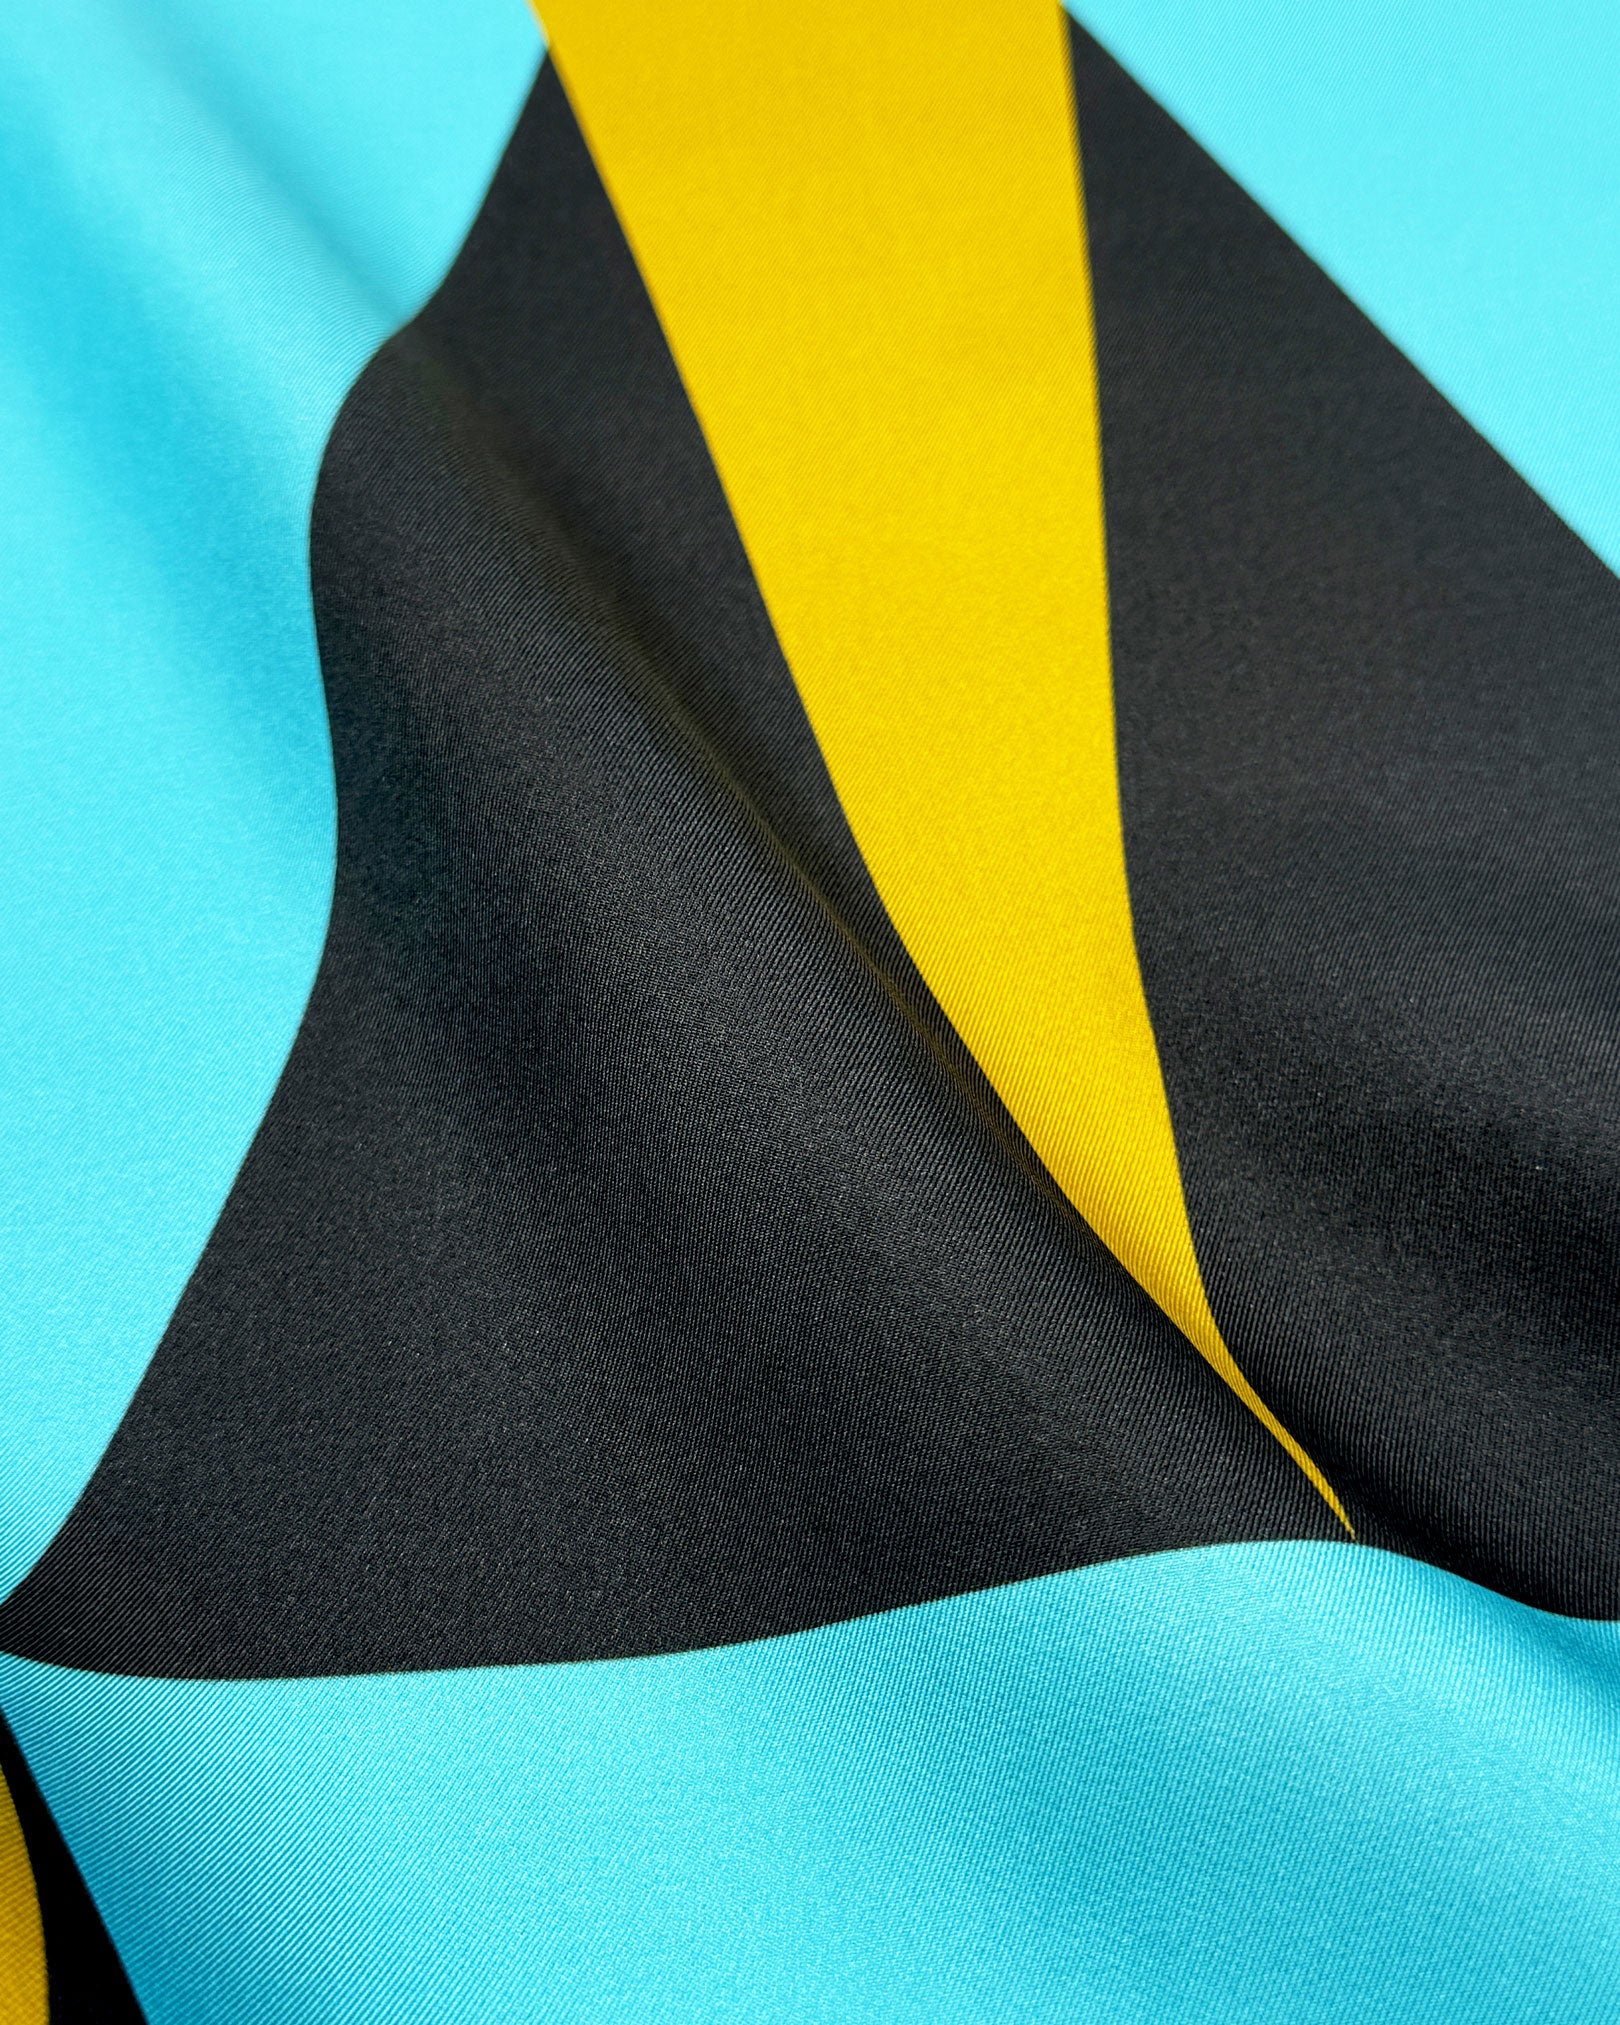 A ruffled close-up of the 'Leipzig' silk scarf, presenting the combination of pale blue, charcoal grey and yellow triangles.